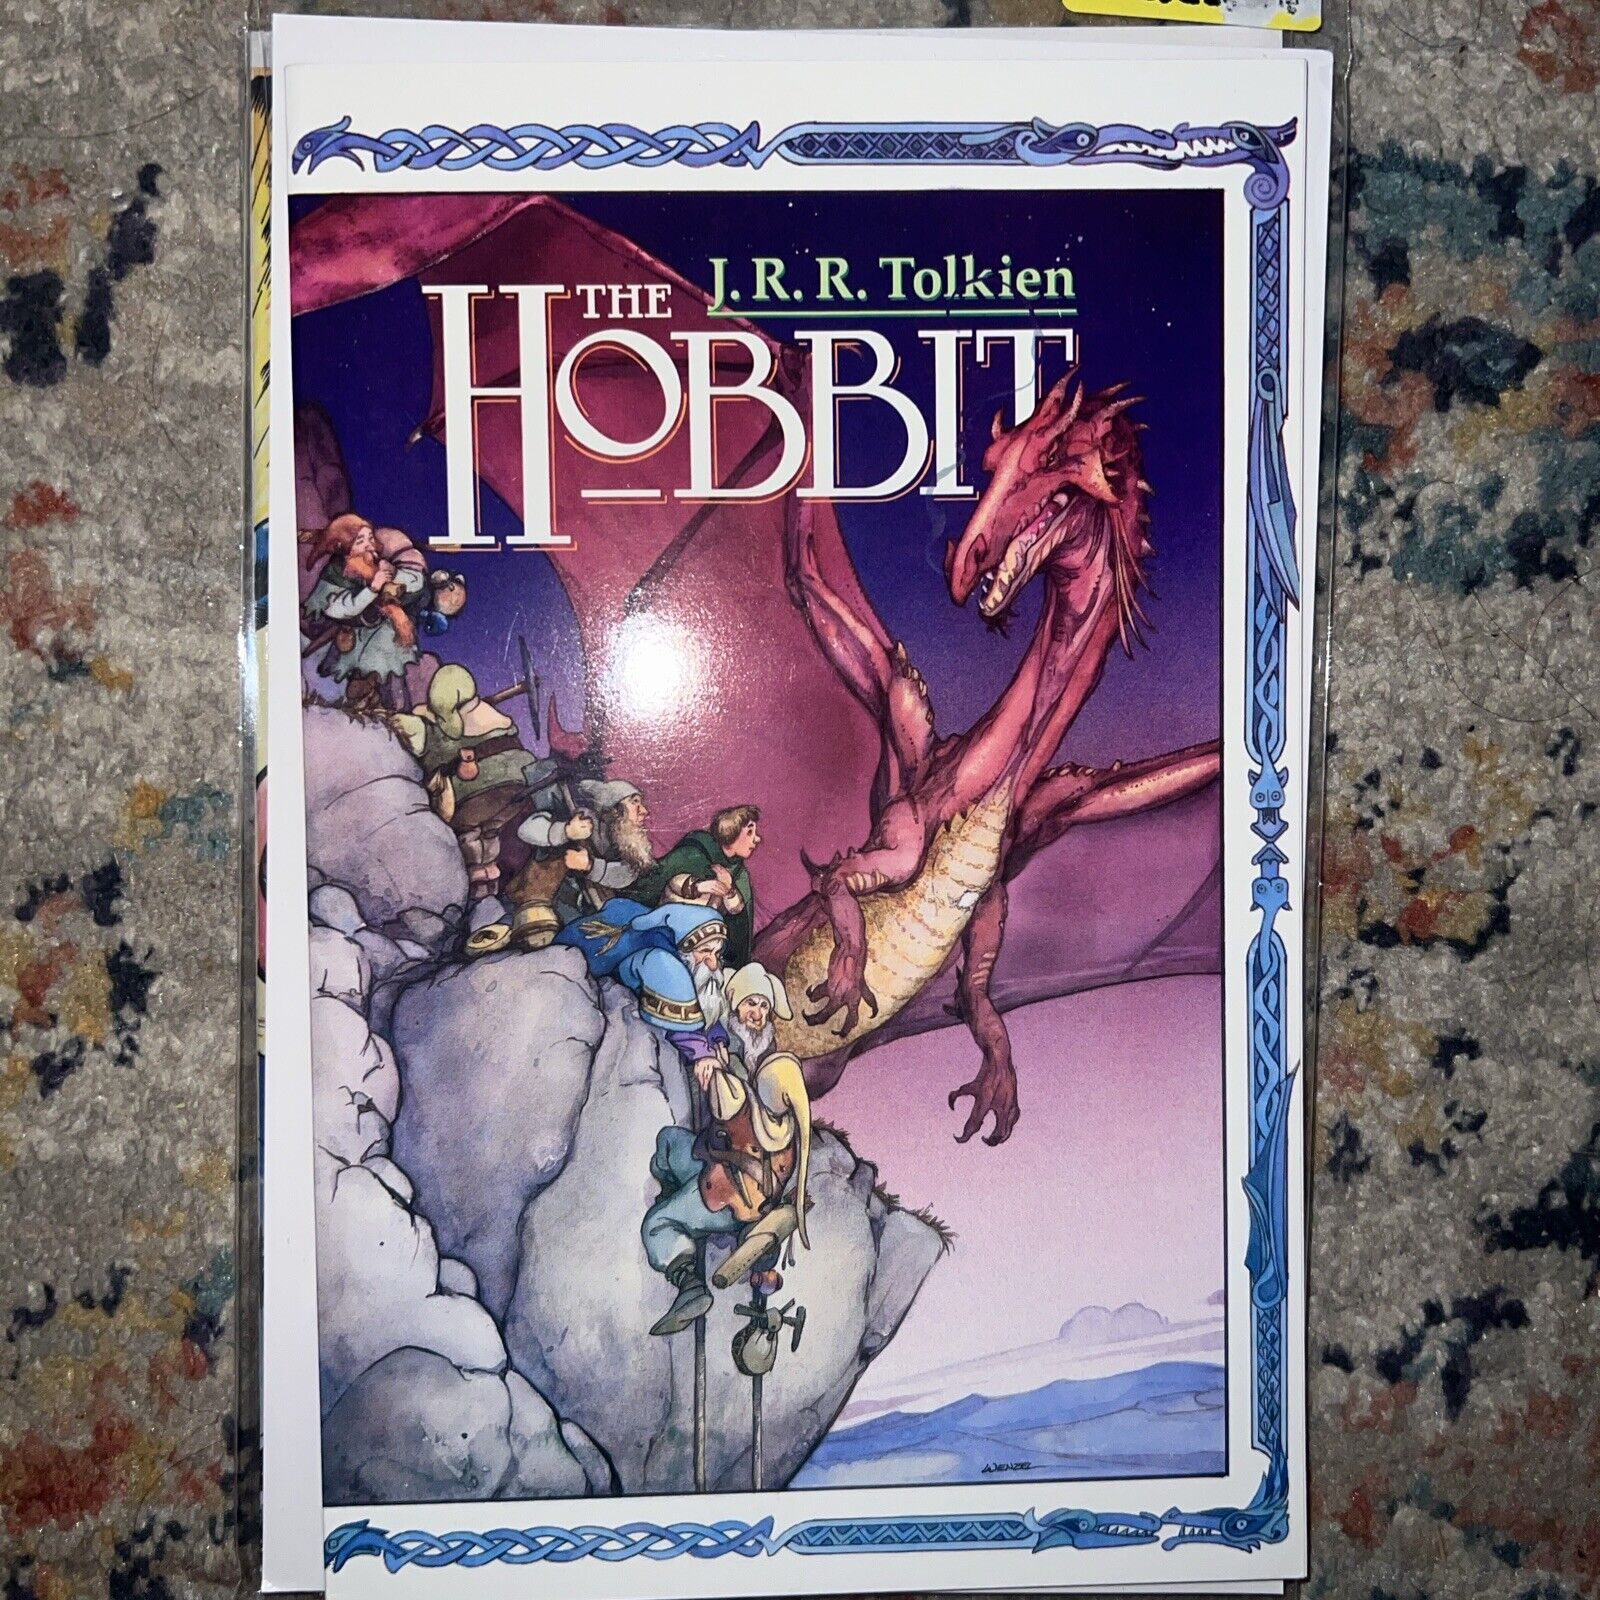 Eclipse The Hobbit #3 (1991) JRR Tolkien; Smaug Cover